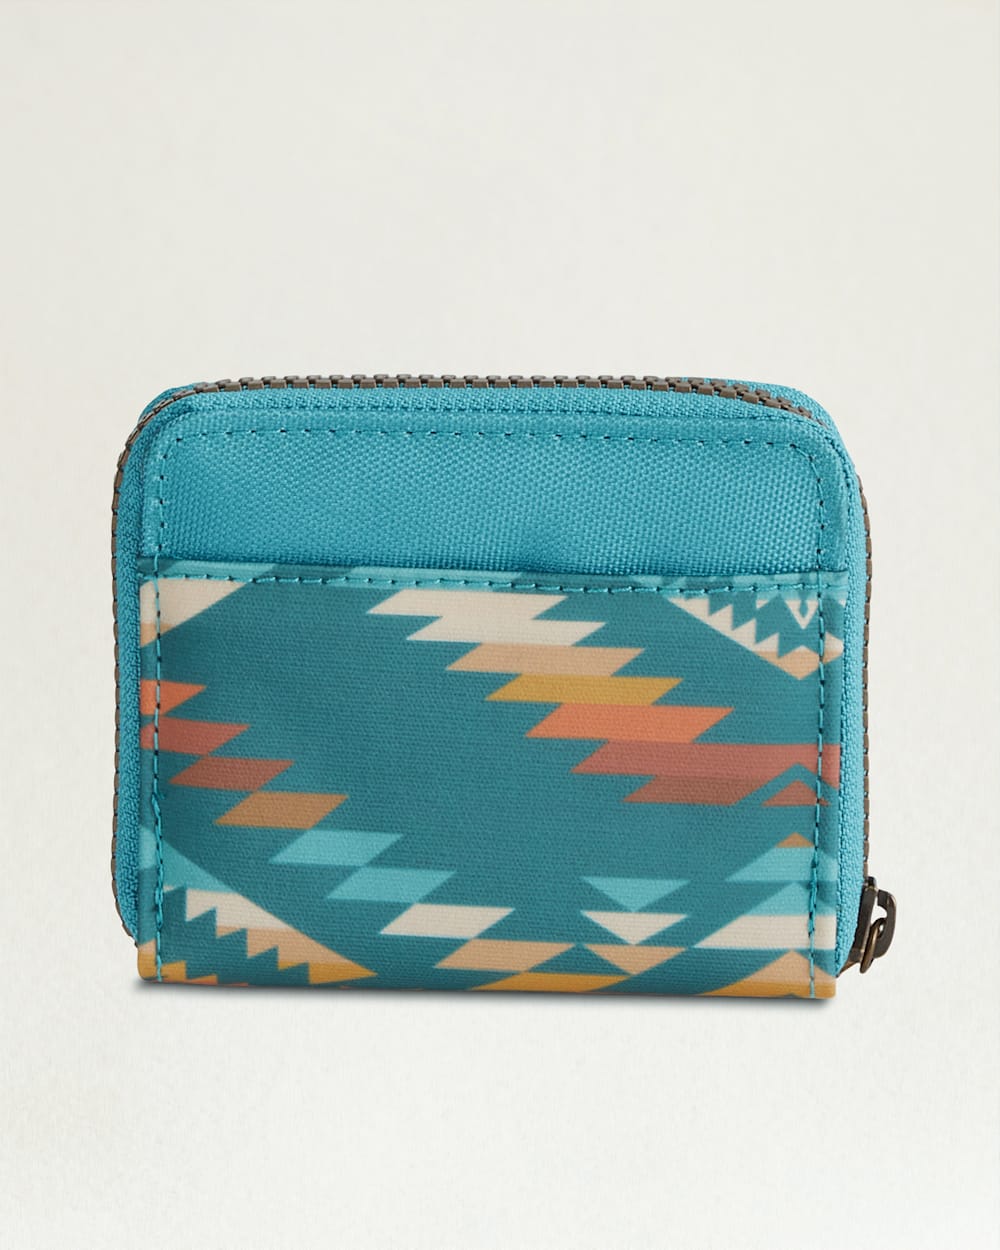 ALTERNATE VIEW OF SUMMERLAND BRIGHT CANOPY CANVAS KEYCHAIN WALLET IN TURQUOISE image number 2